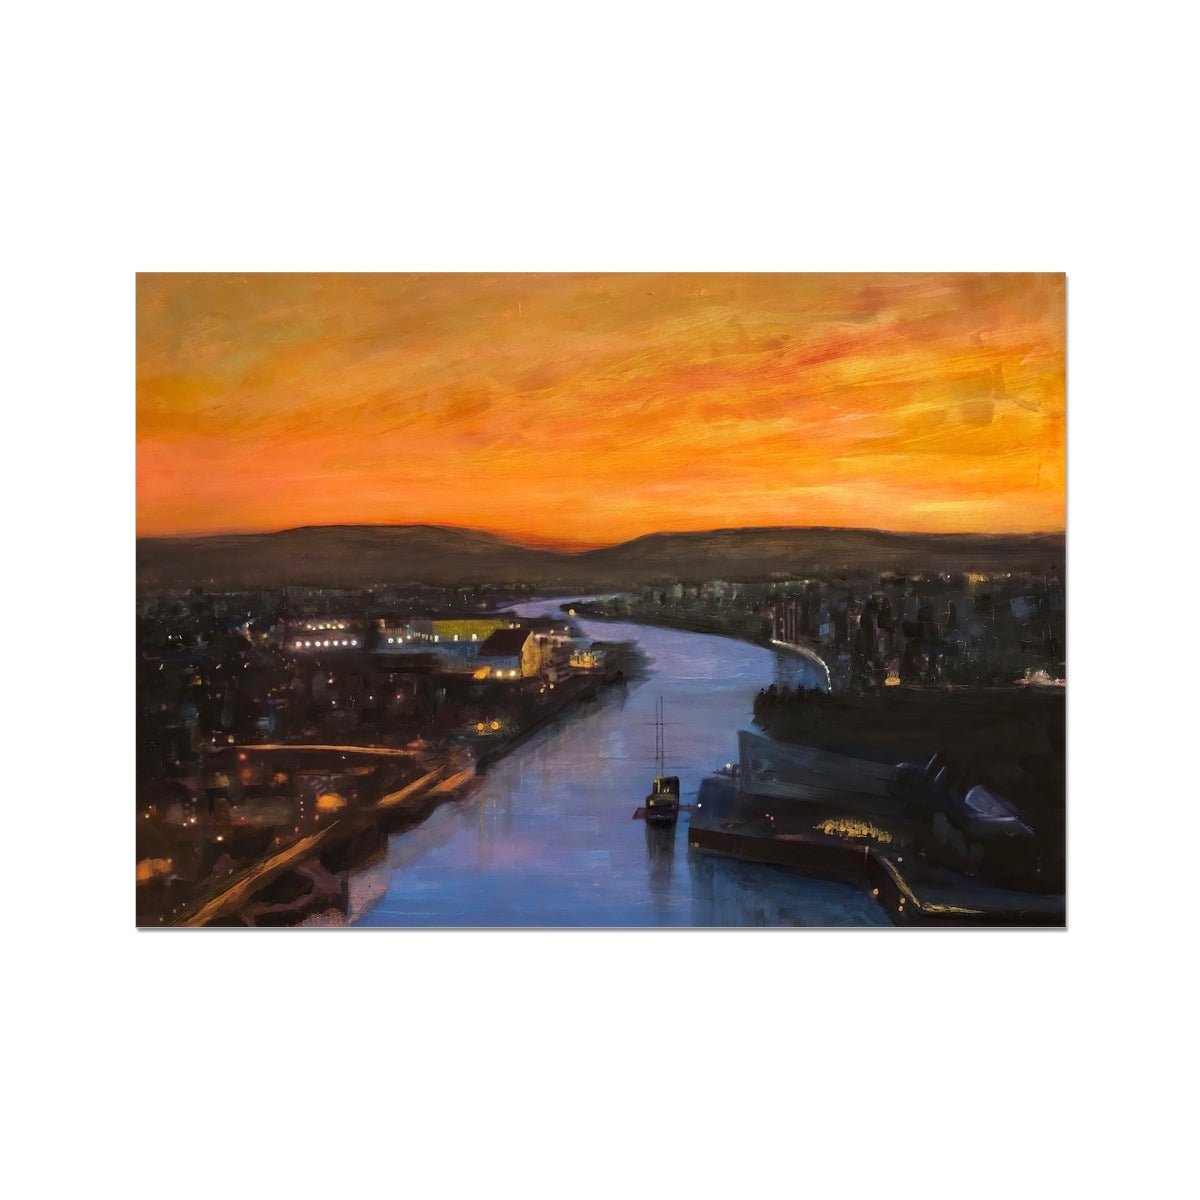 Glasgow Harbour Looking West Painting | Fine Art Prints From Scotland-Unframed Prints-Edinburgh & Glasgow Art Gallery-A2 Landscape-Paintings, Prints, Homeware, Art Gifts From Scotland By Scottish Artist Kevin Hunter